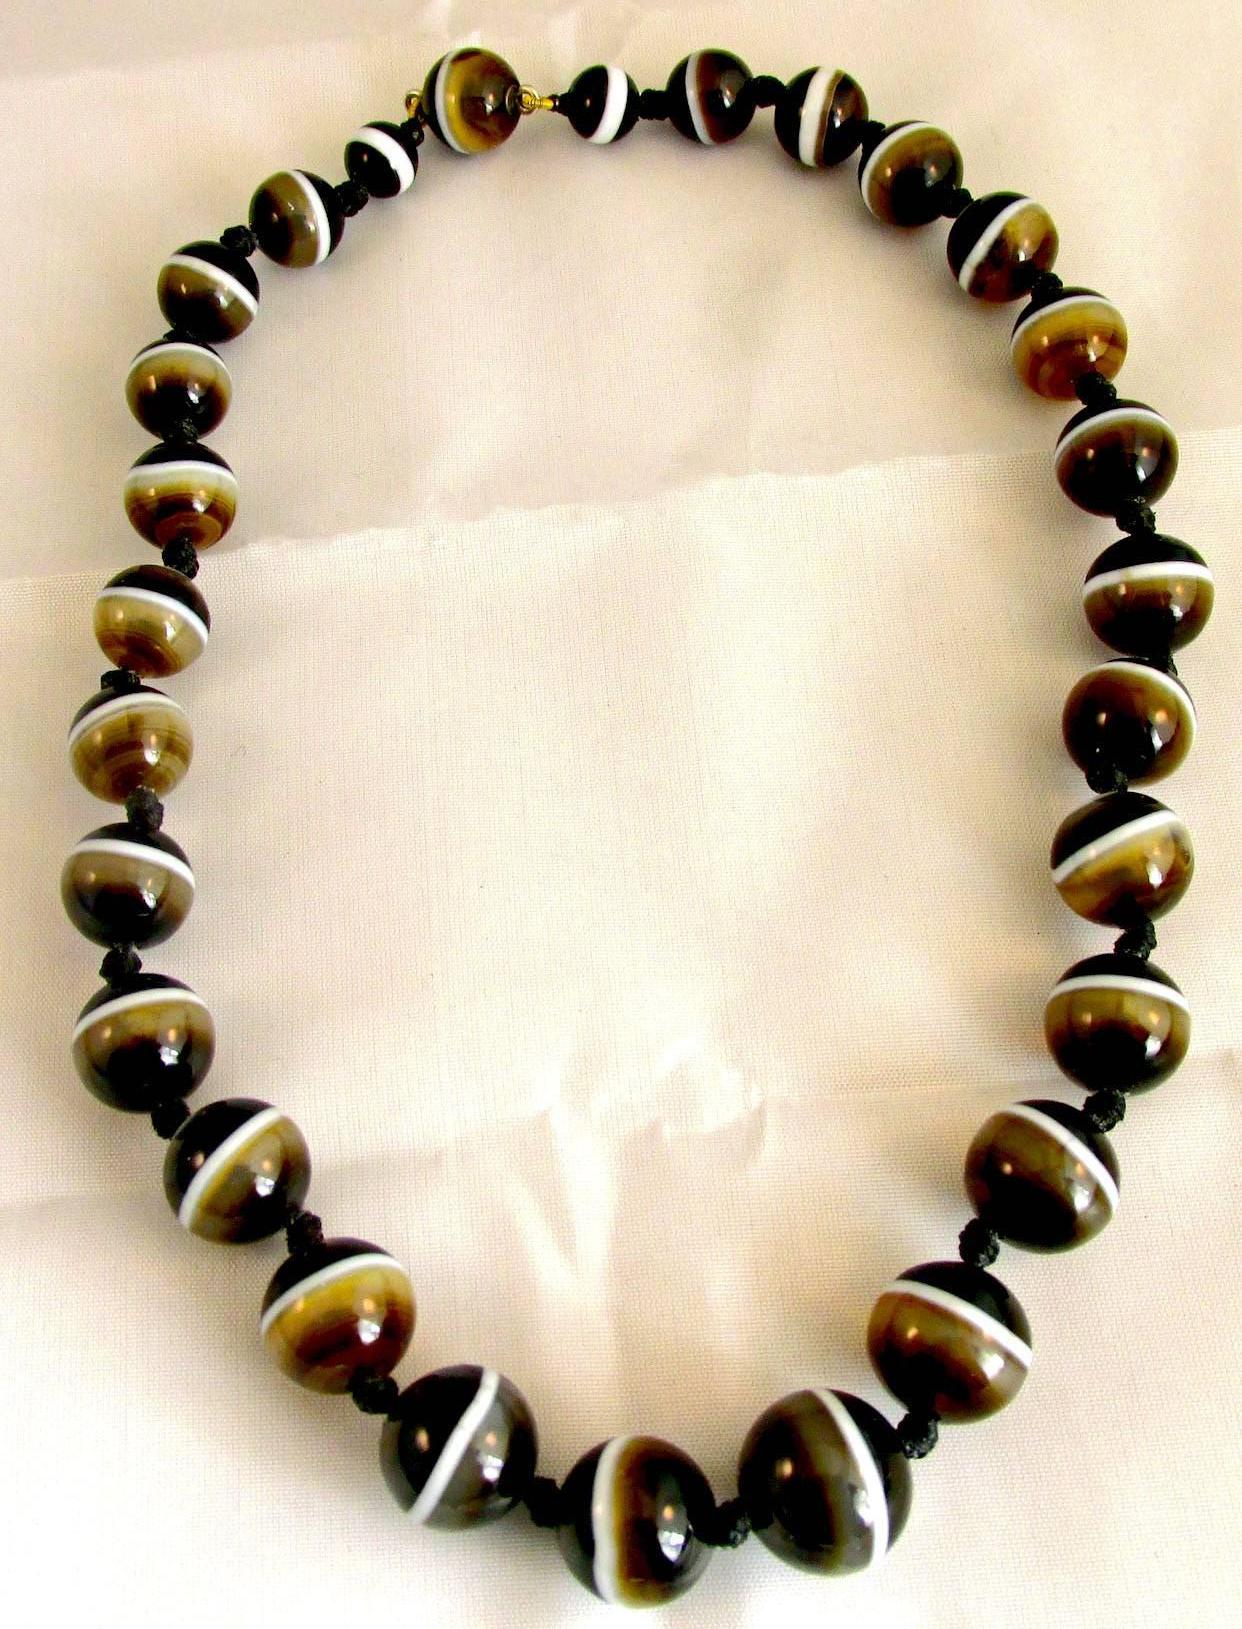 Dramatic Victorian agate bead necklace is fastened with an agate clasp. The striking banded agate beads are black, brown and white and can be worn day or night. The necklace measures 17